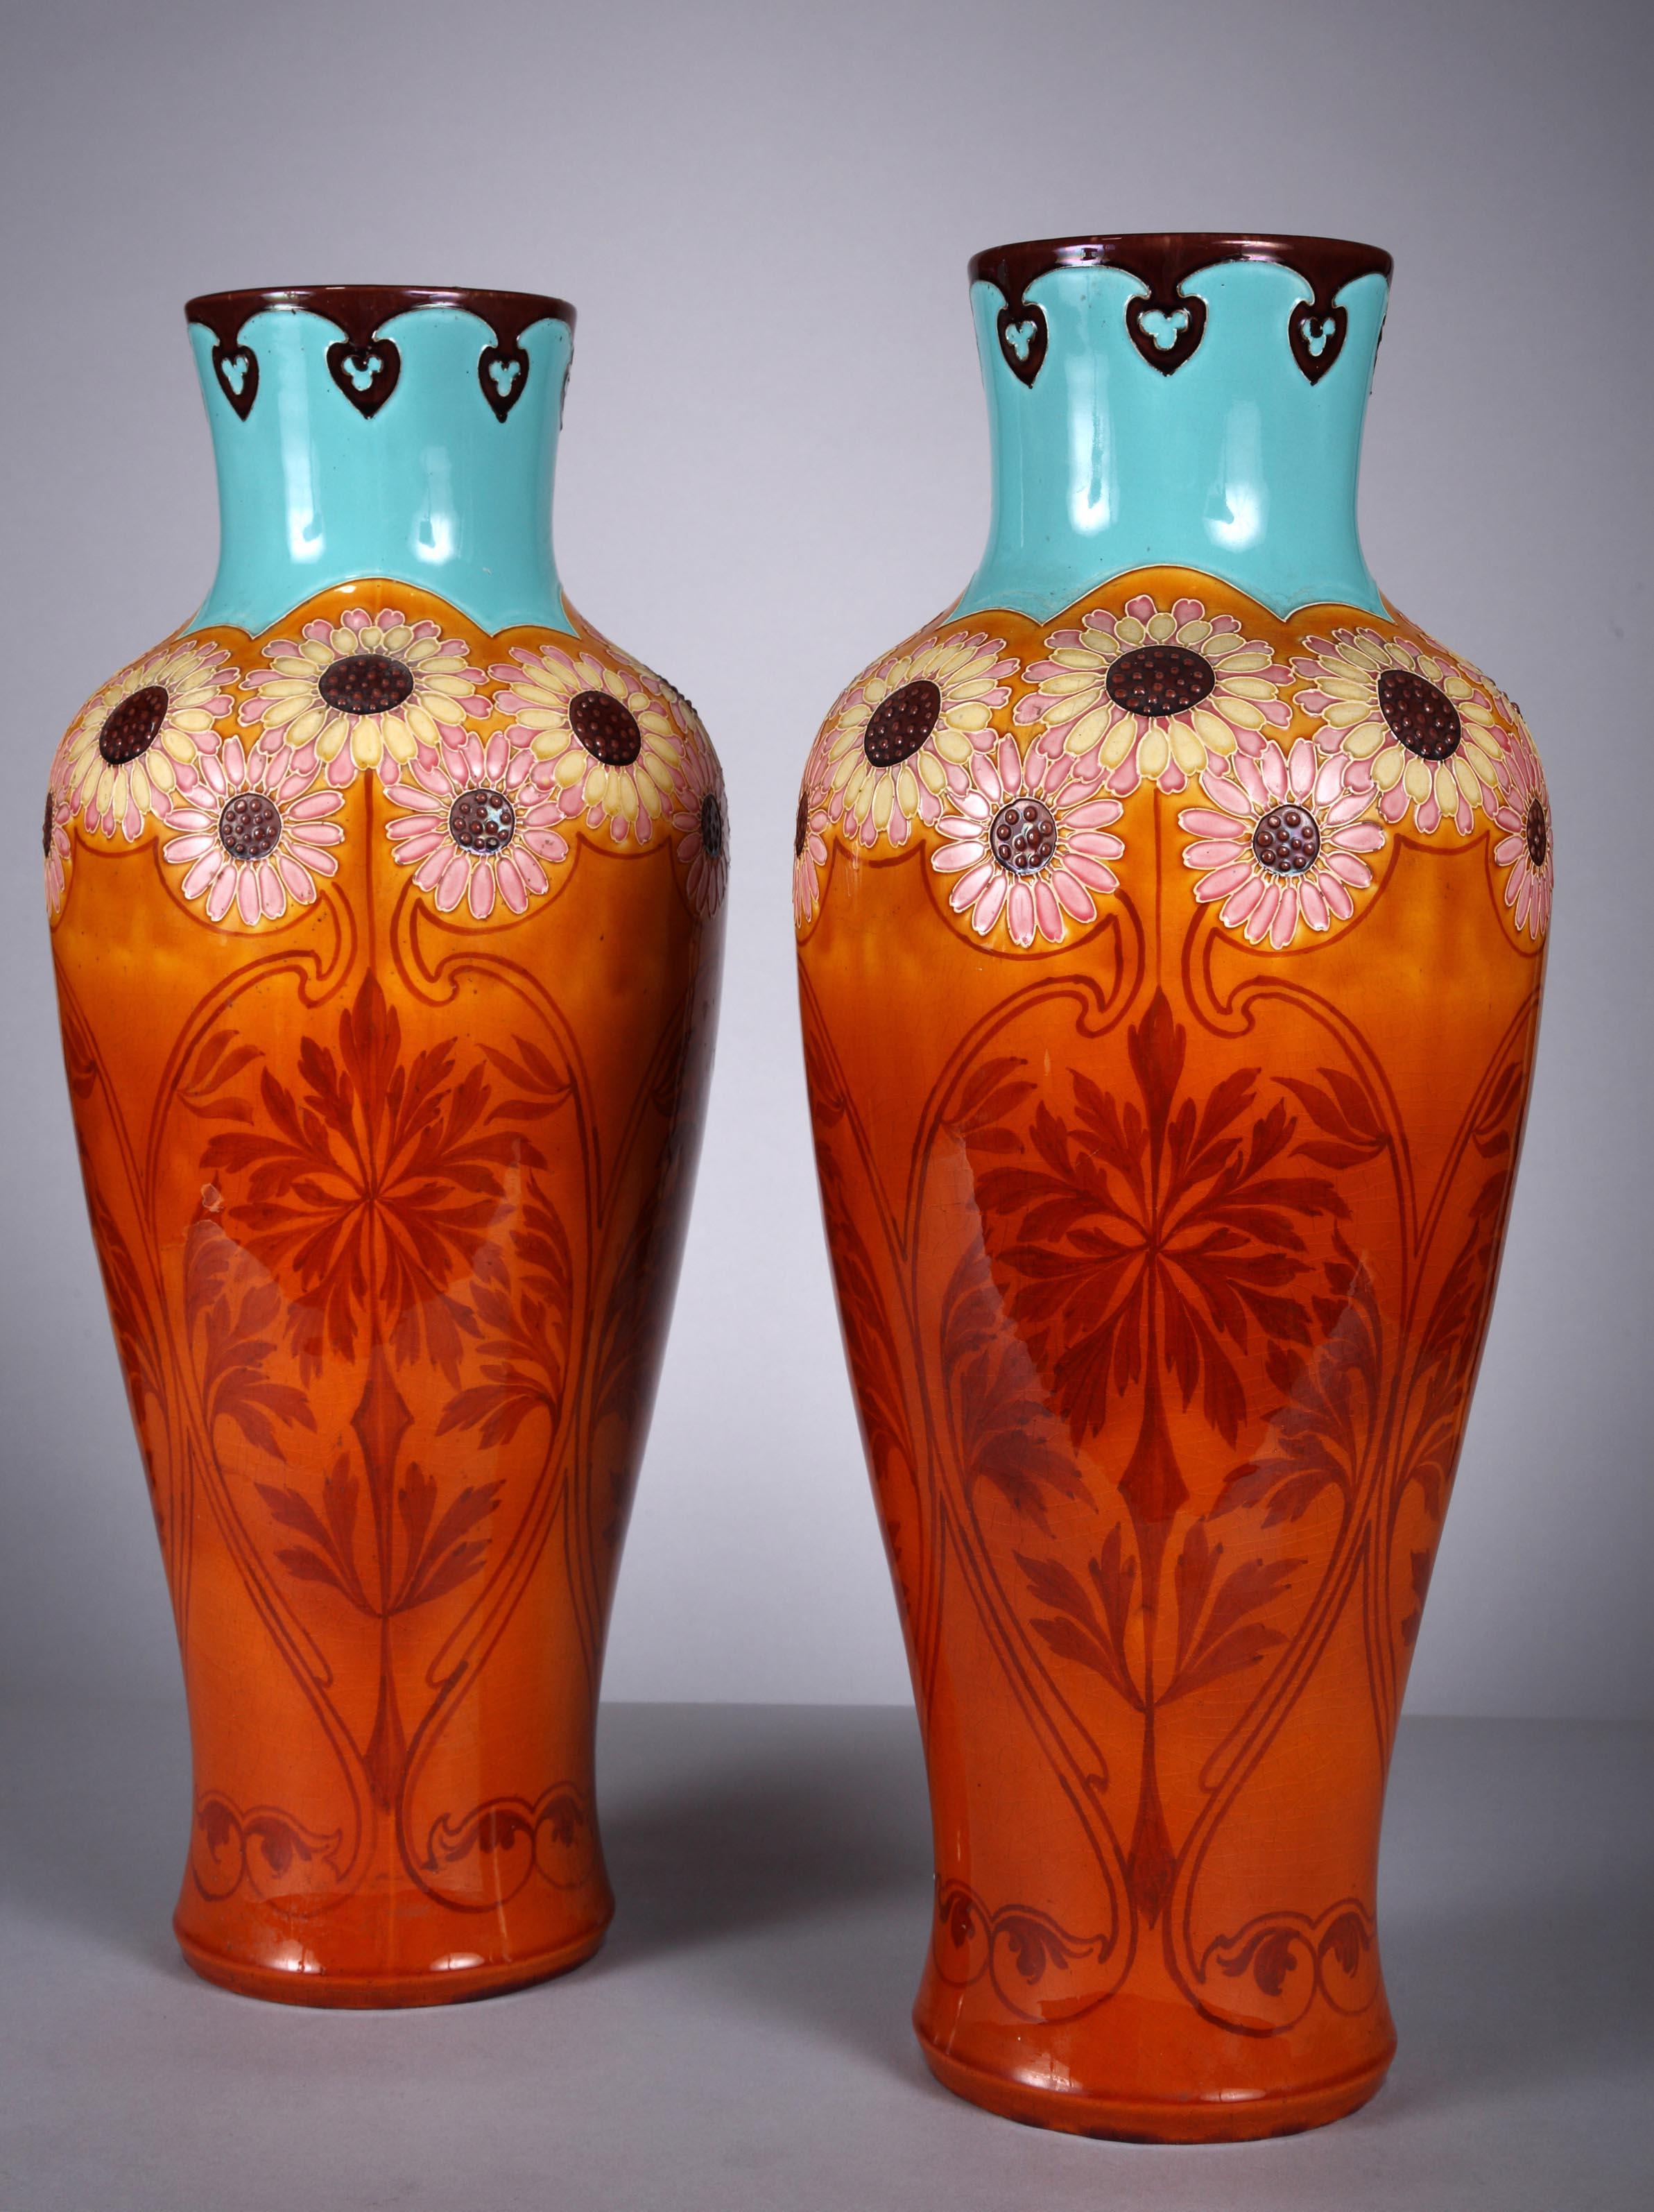 LIBERTY
Pair of Vases
England
Circa 1910
Factory production mark stamped on the underside of the vase 